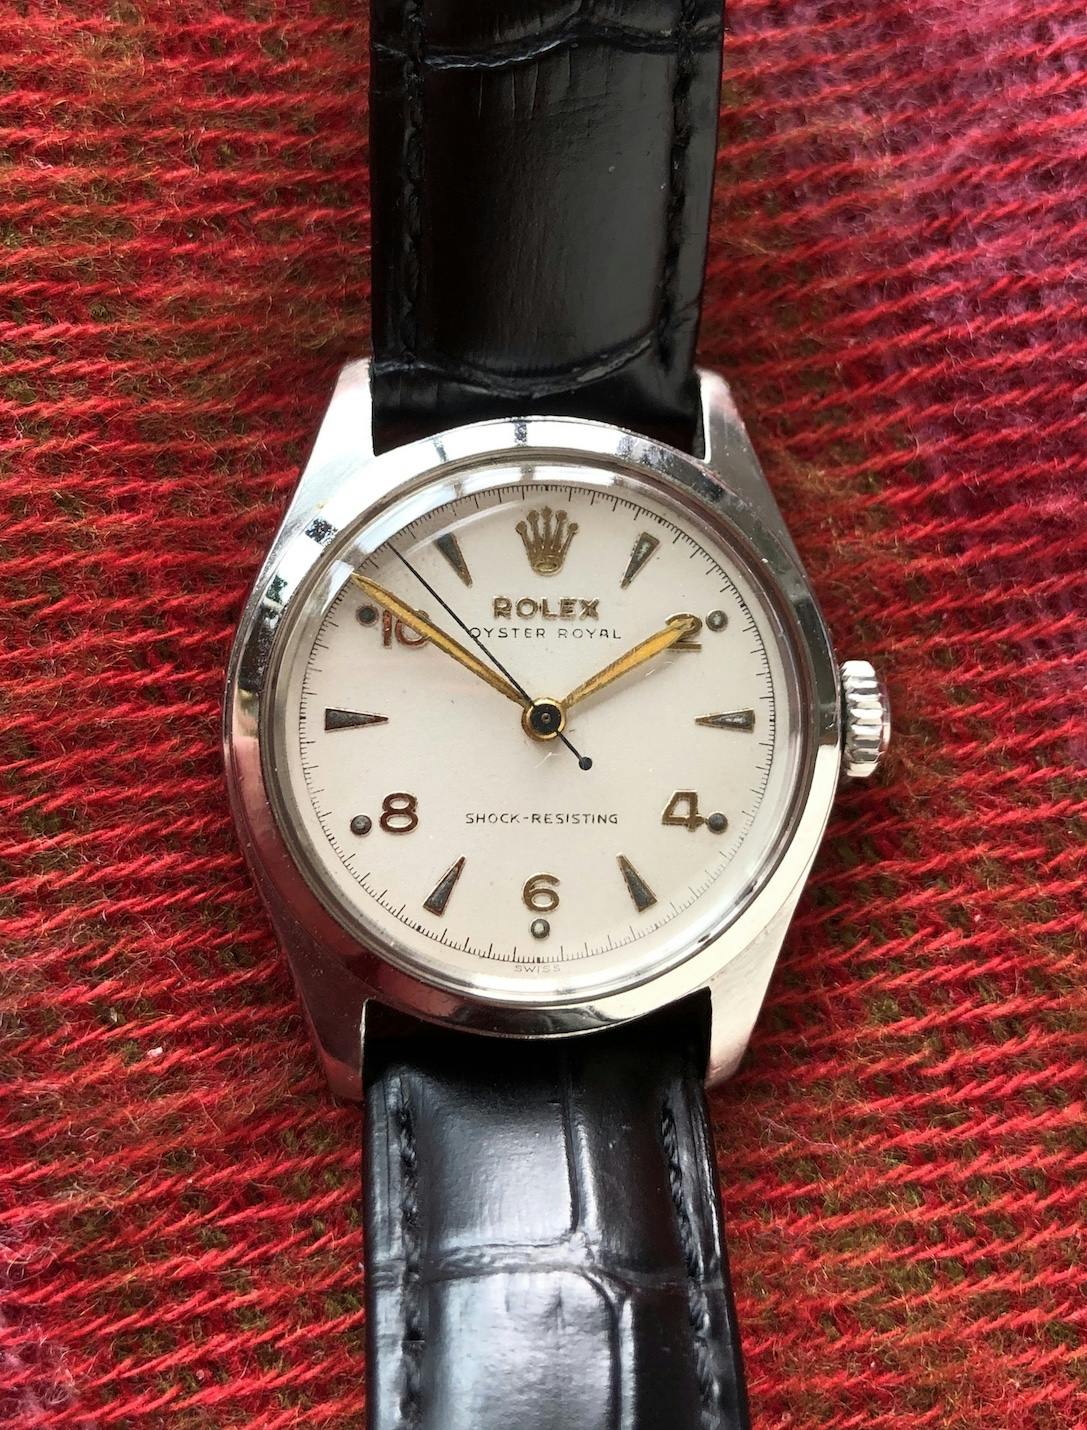 Rolex Oyster waterproof watch from the early 1950s